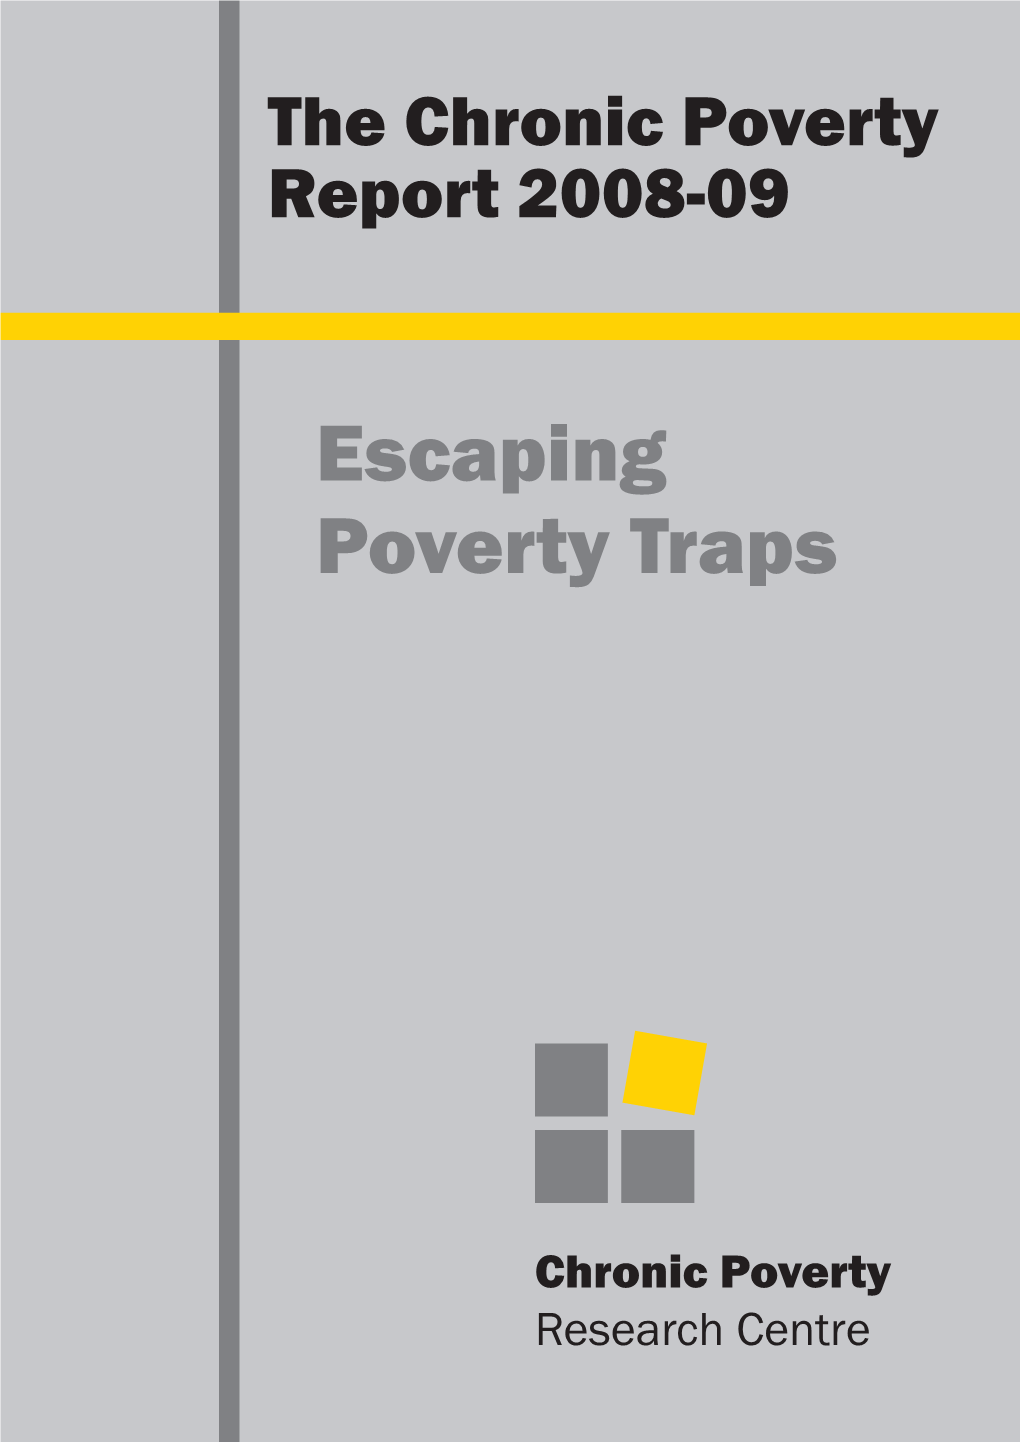 Escaping Poverty Traps  the Chronic Poverty Report 2008-09